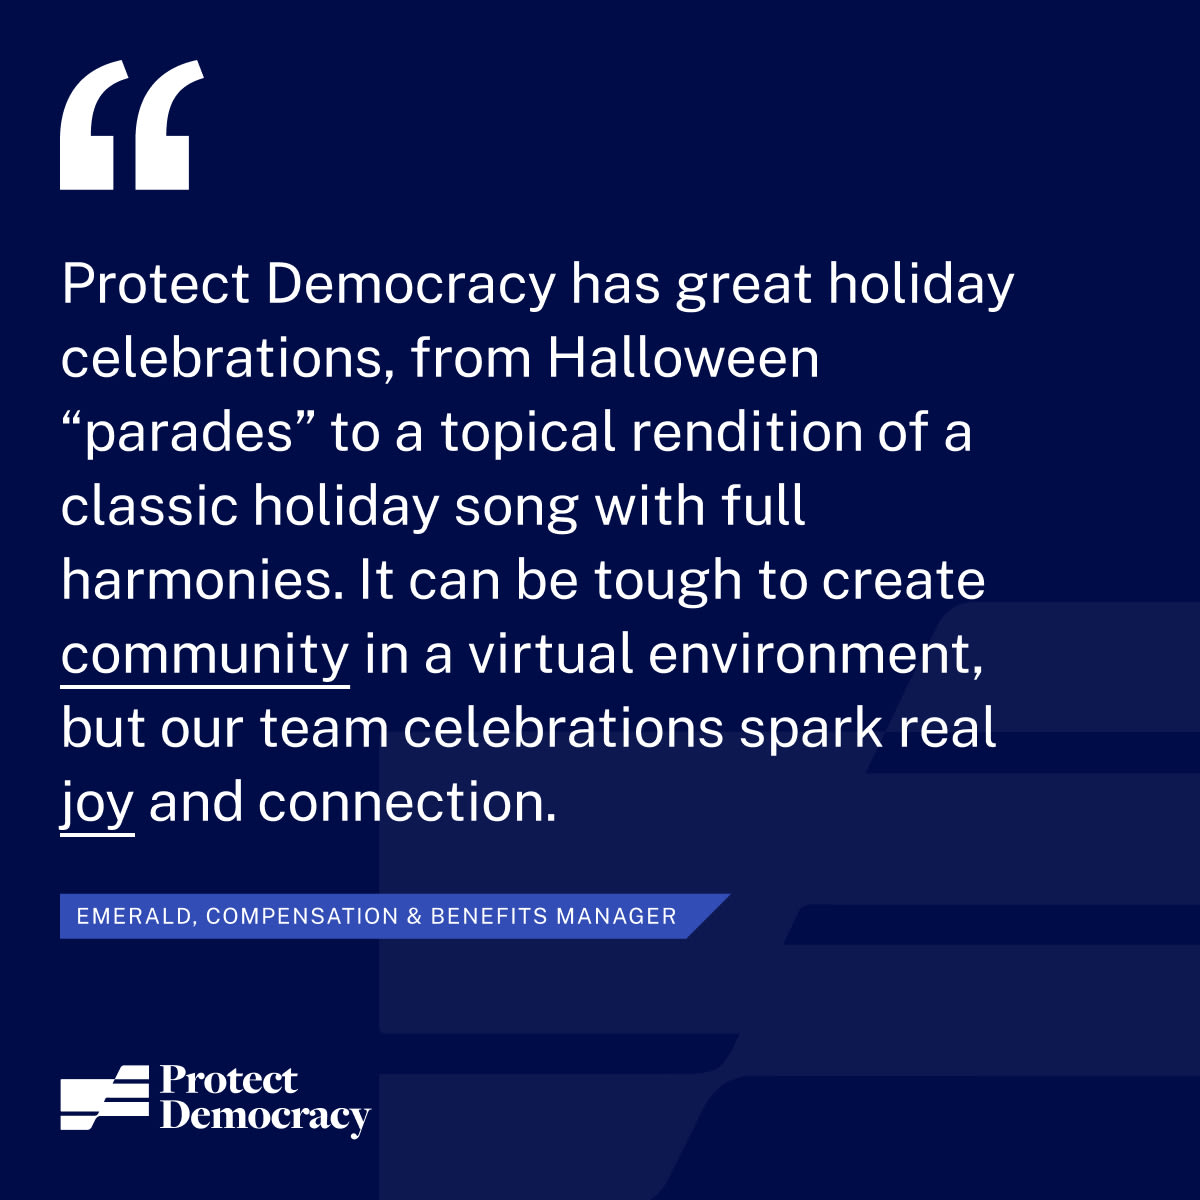 “Protect Democracy has great holiday celebrations, from halloween “parades” to a topical rendition of a classic holiday song with full harmonies. It can be tough to create community in a virtual environment, but our team celebrations spark real joy and connection.” - Emerald, Compensation & Benefits Manager